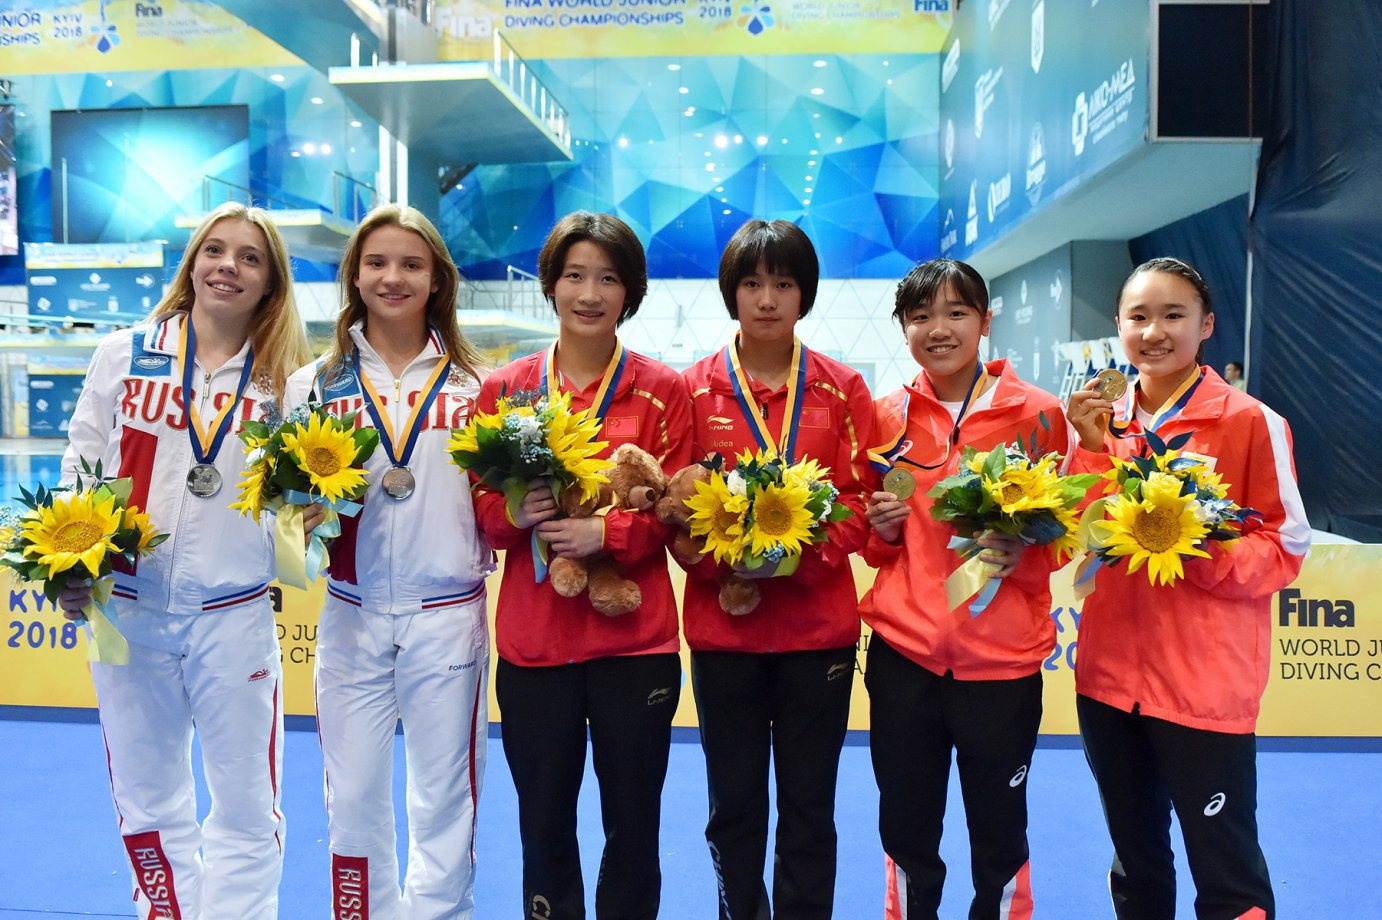 China dominated the FINA World Junior Diving Championships in 2018, also held in Kyiv, but will not be competing in this year's event ©Getty Images